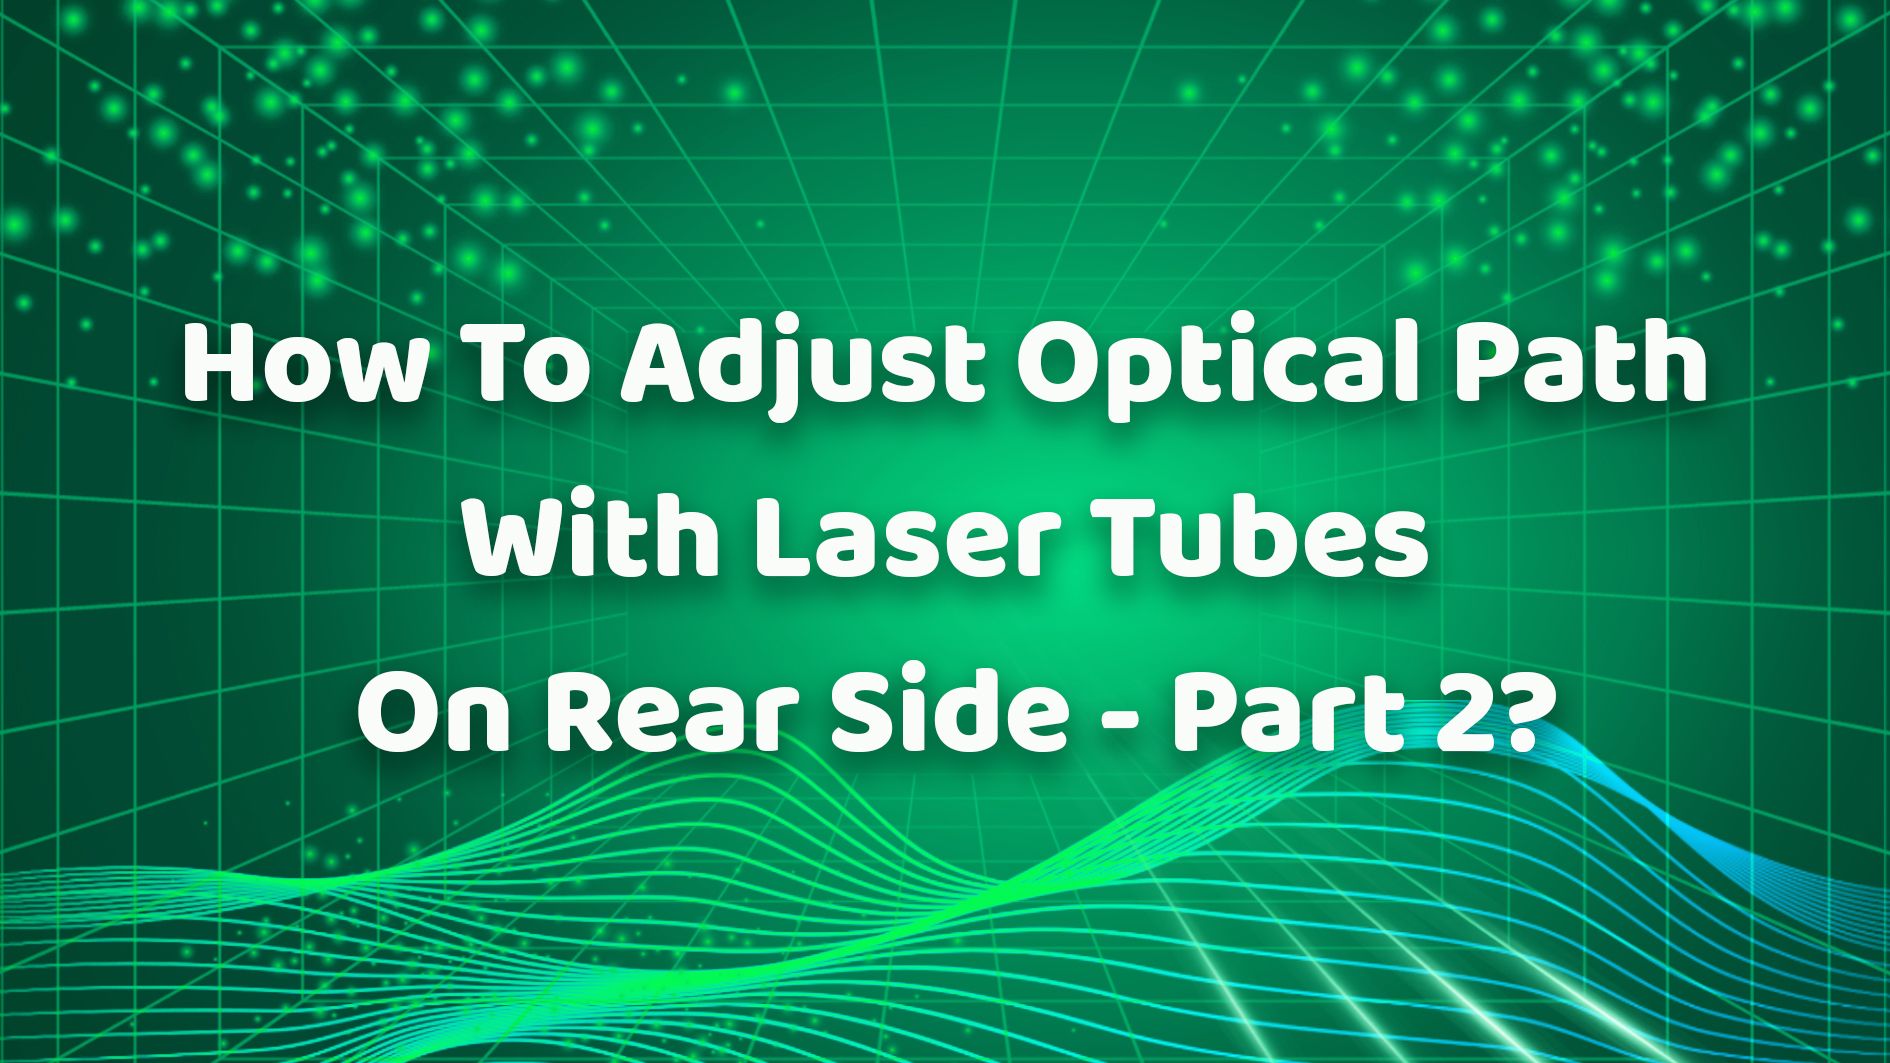 How To Adjust Optical Path With Laser Tubes On Rear Side - Part 2？